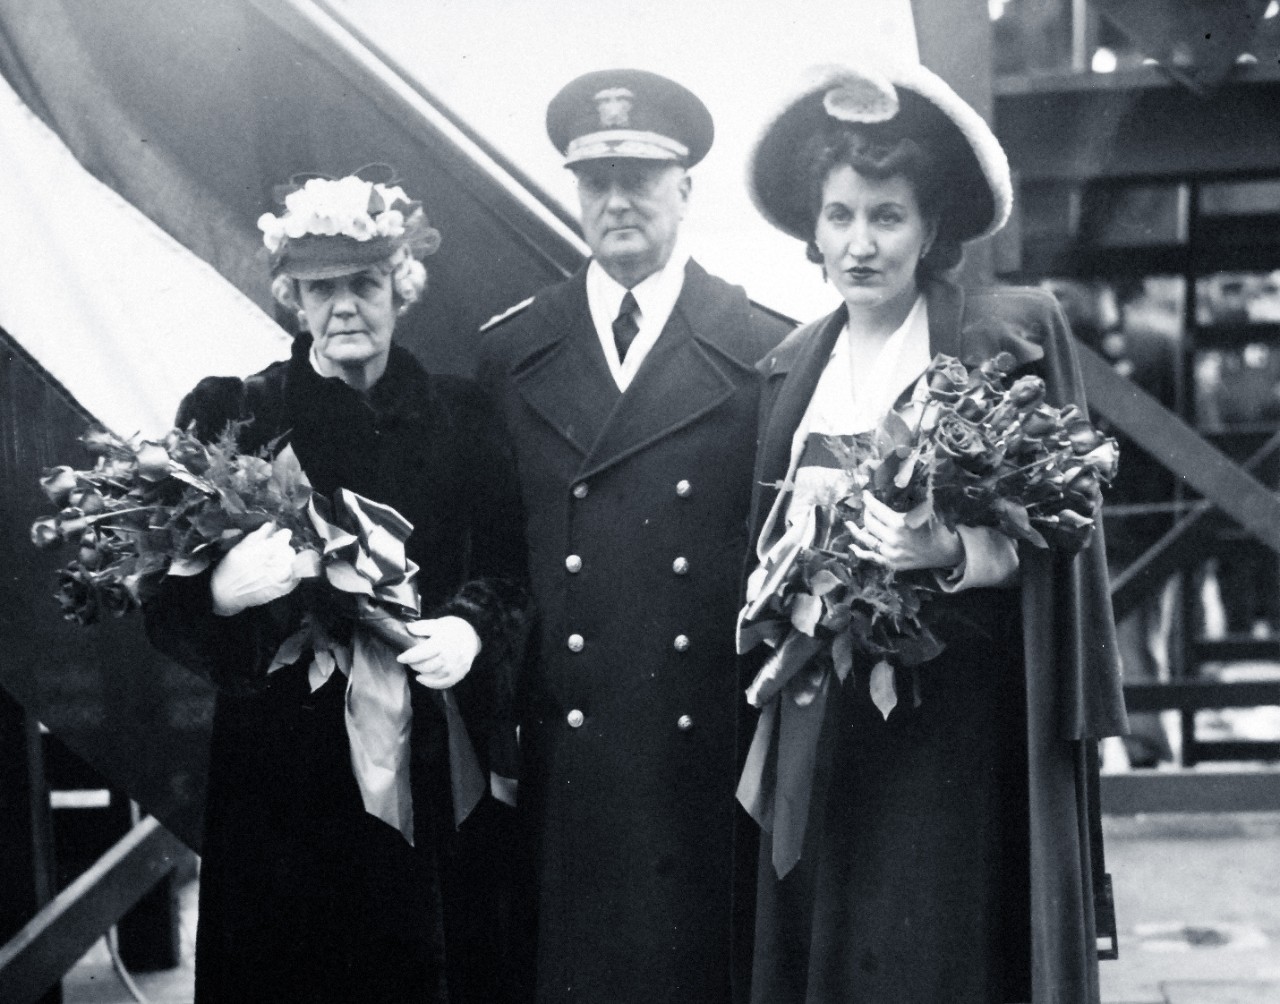 80-G-62015:  Mrs. James A. Dempsey, Ship’s Sponsor of USS Dempsey (DE 26), (left), Rear Admiral Robert A. Theobald, USN, (center), and Mrs. Mary Wintle, Ship’s Sponsor of USS Wintle (DE 25), (right), at the Boston Navy Yard, Boston, Massachusetts, for the christening and launching of both destroyer escorts on April 22, 1943. Wintle was named after Lieutenant Commander Jack W. Wintle who was killed on board USS San Francisco (CA 38) during the Naval Battle of Guadalcanal in November 1942.  Official U.S. Navy Photograph, now in the collections of the National Archives.     (2015/10/06).